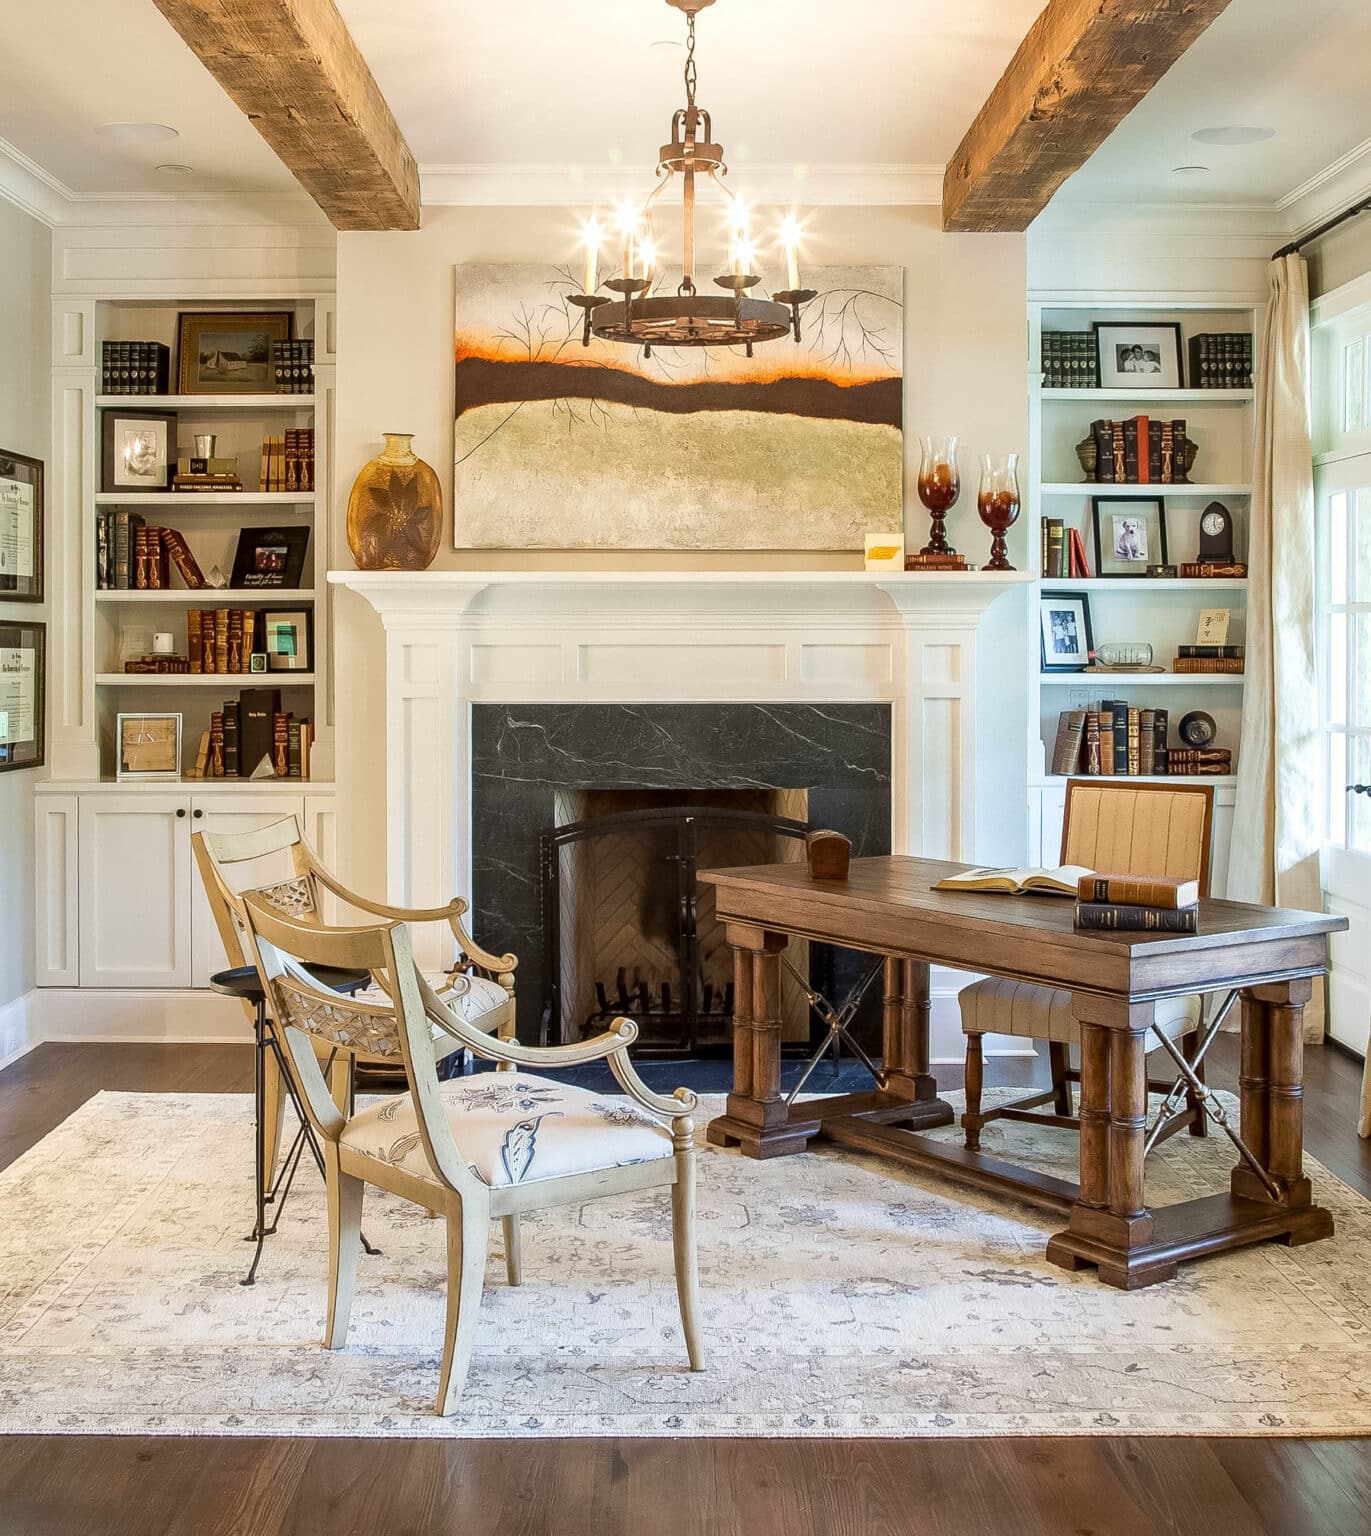 An elegant home office with a traditional wooden desk, classic armchairs, and a fireplace, under a rustic chandelier